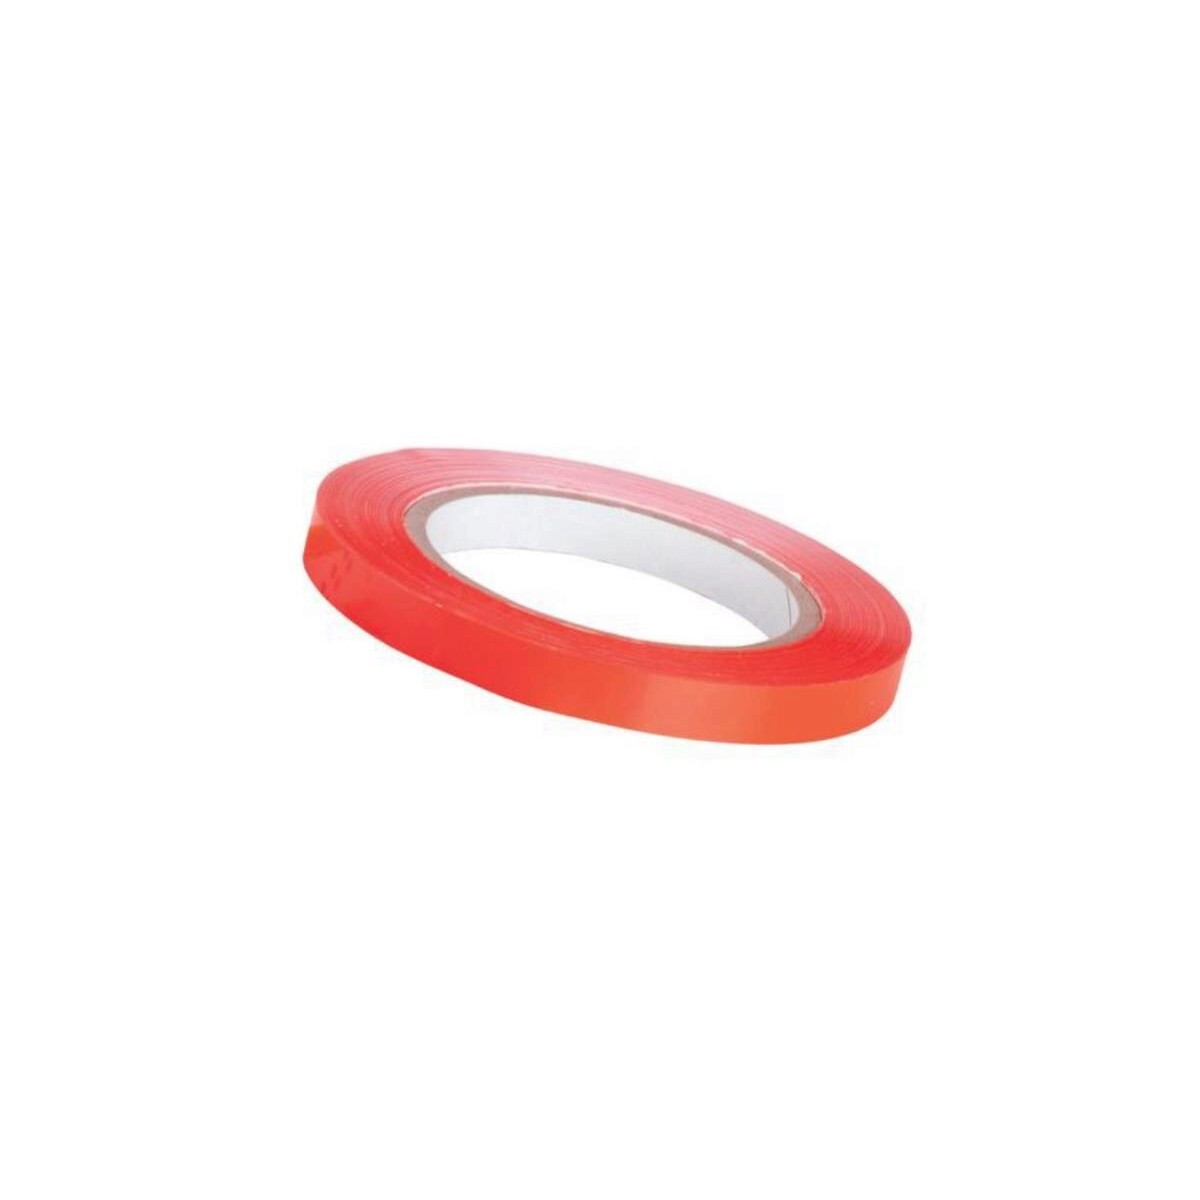 RED STICKY PAPER TAPE Ø9MM X 66M 32PIECES  PACKAGE